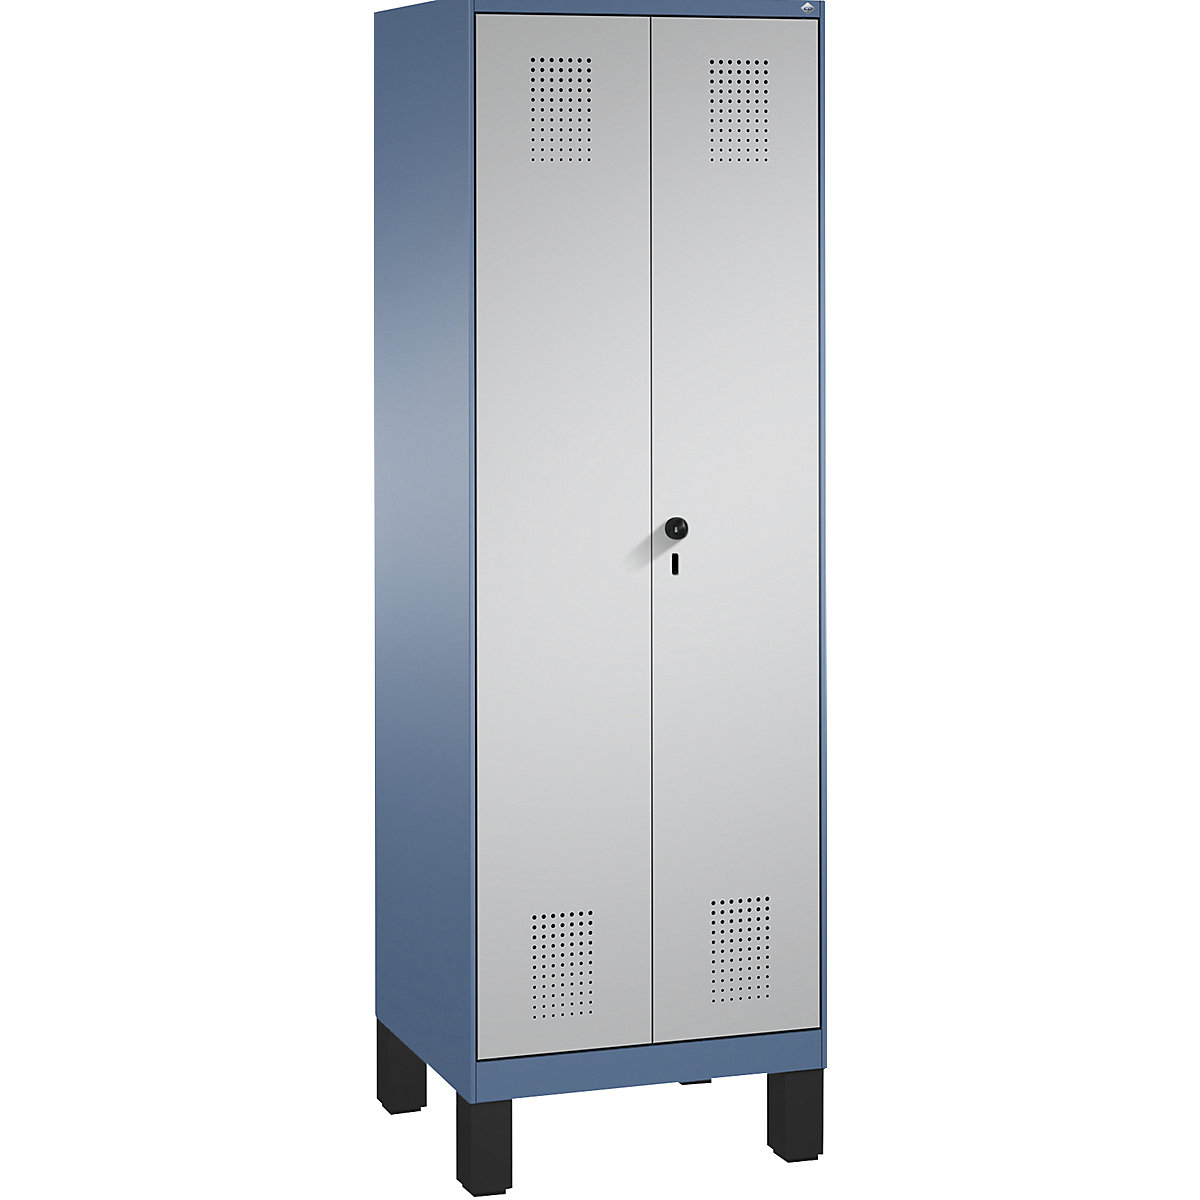 EVOLO laundry cupboard / cloakroom locker – C+P, 4 shelves, clothes rail, compartments 2 x 300 mm, with feet, distant blue / white aluminium-3